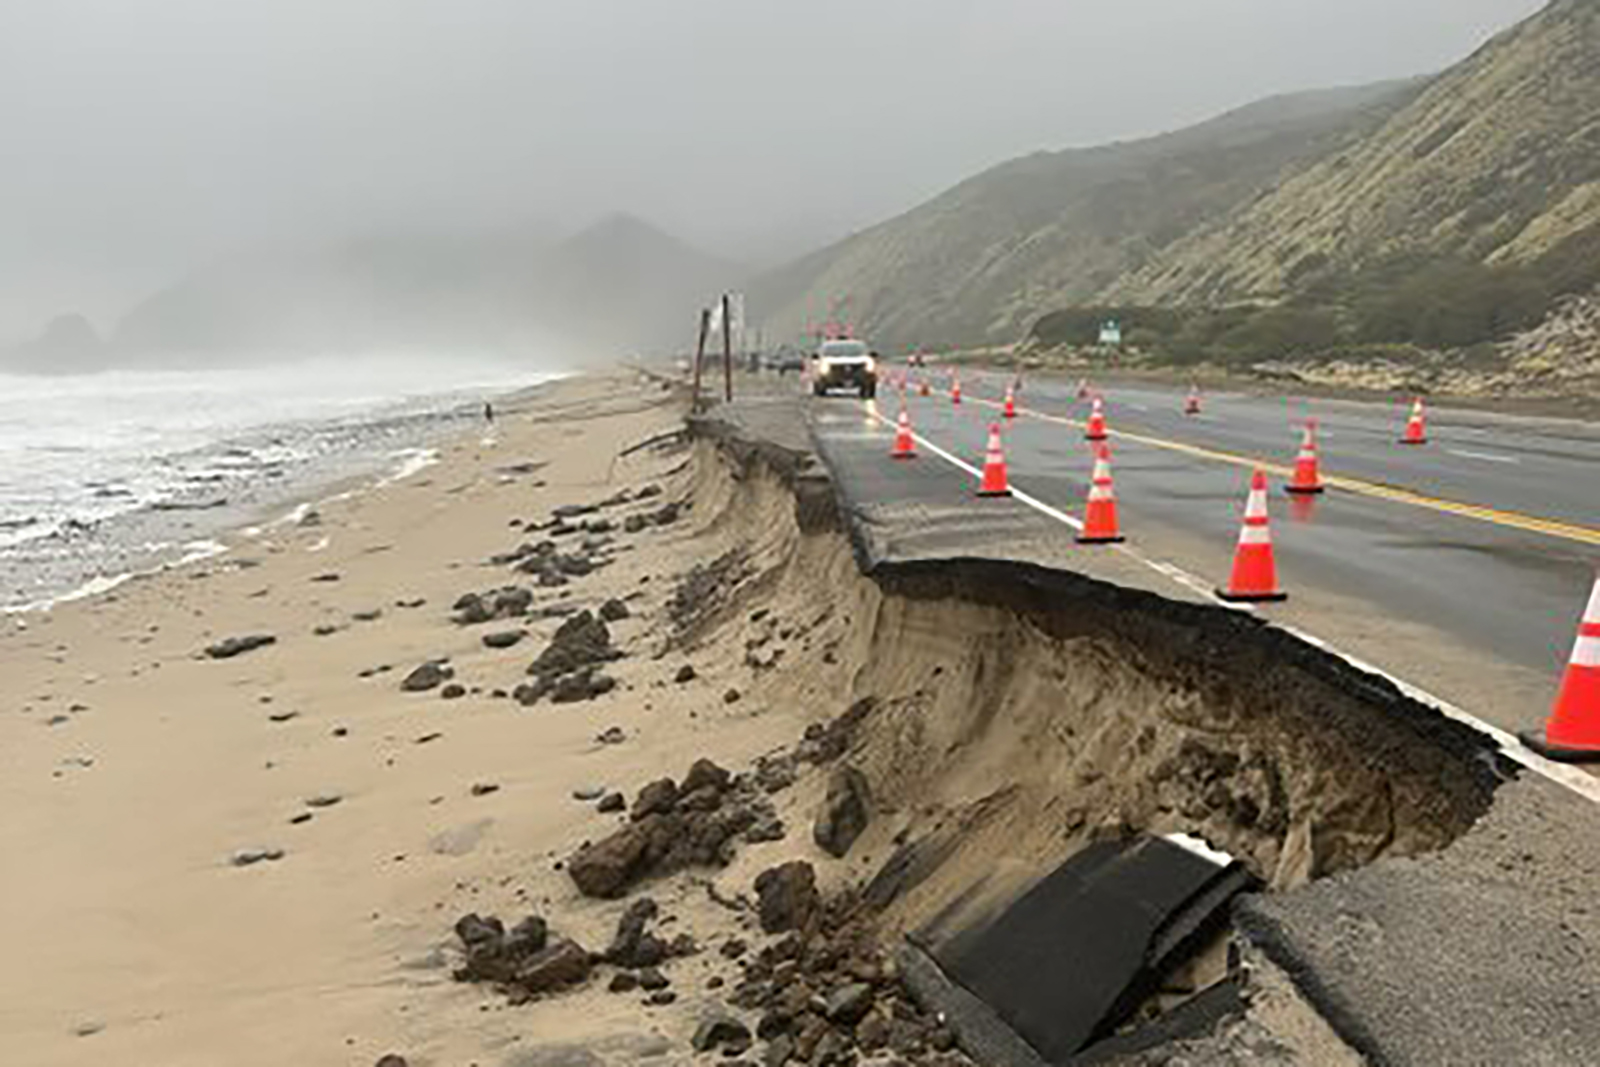 The Pacific Coast Highway is closed in both directions from Las Posas Road to Sycamore Canyon Road.